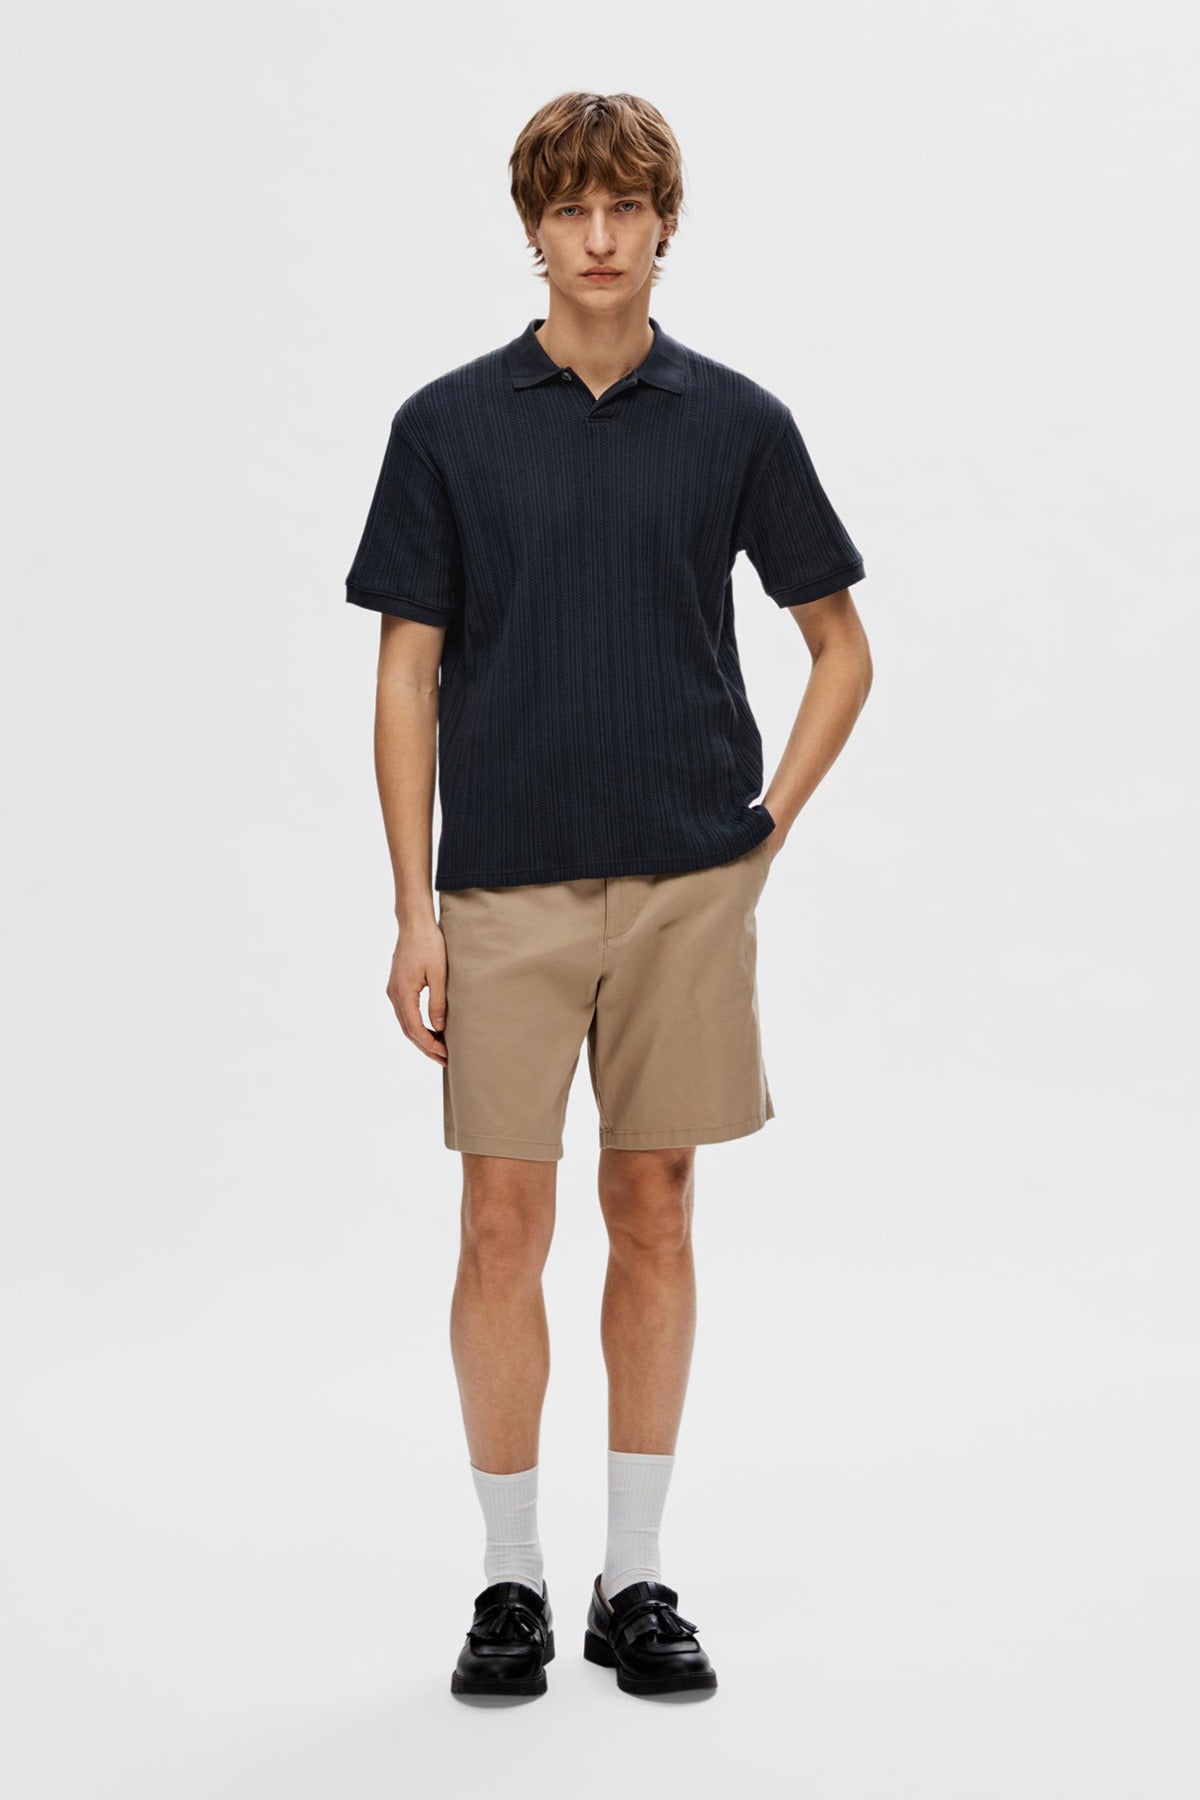 SELECTED HOMME Polo Jaden Jacquar